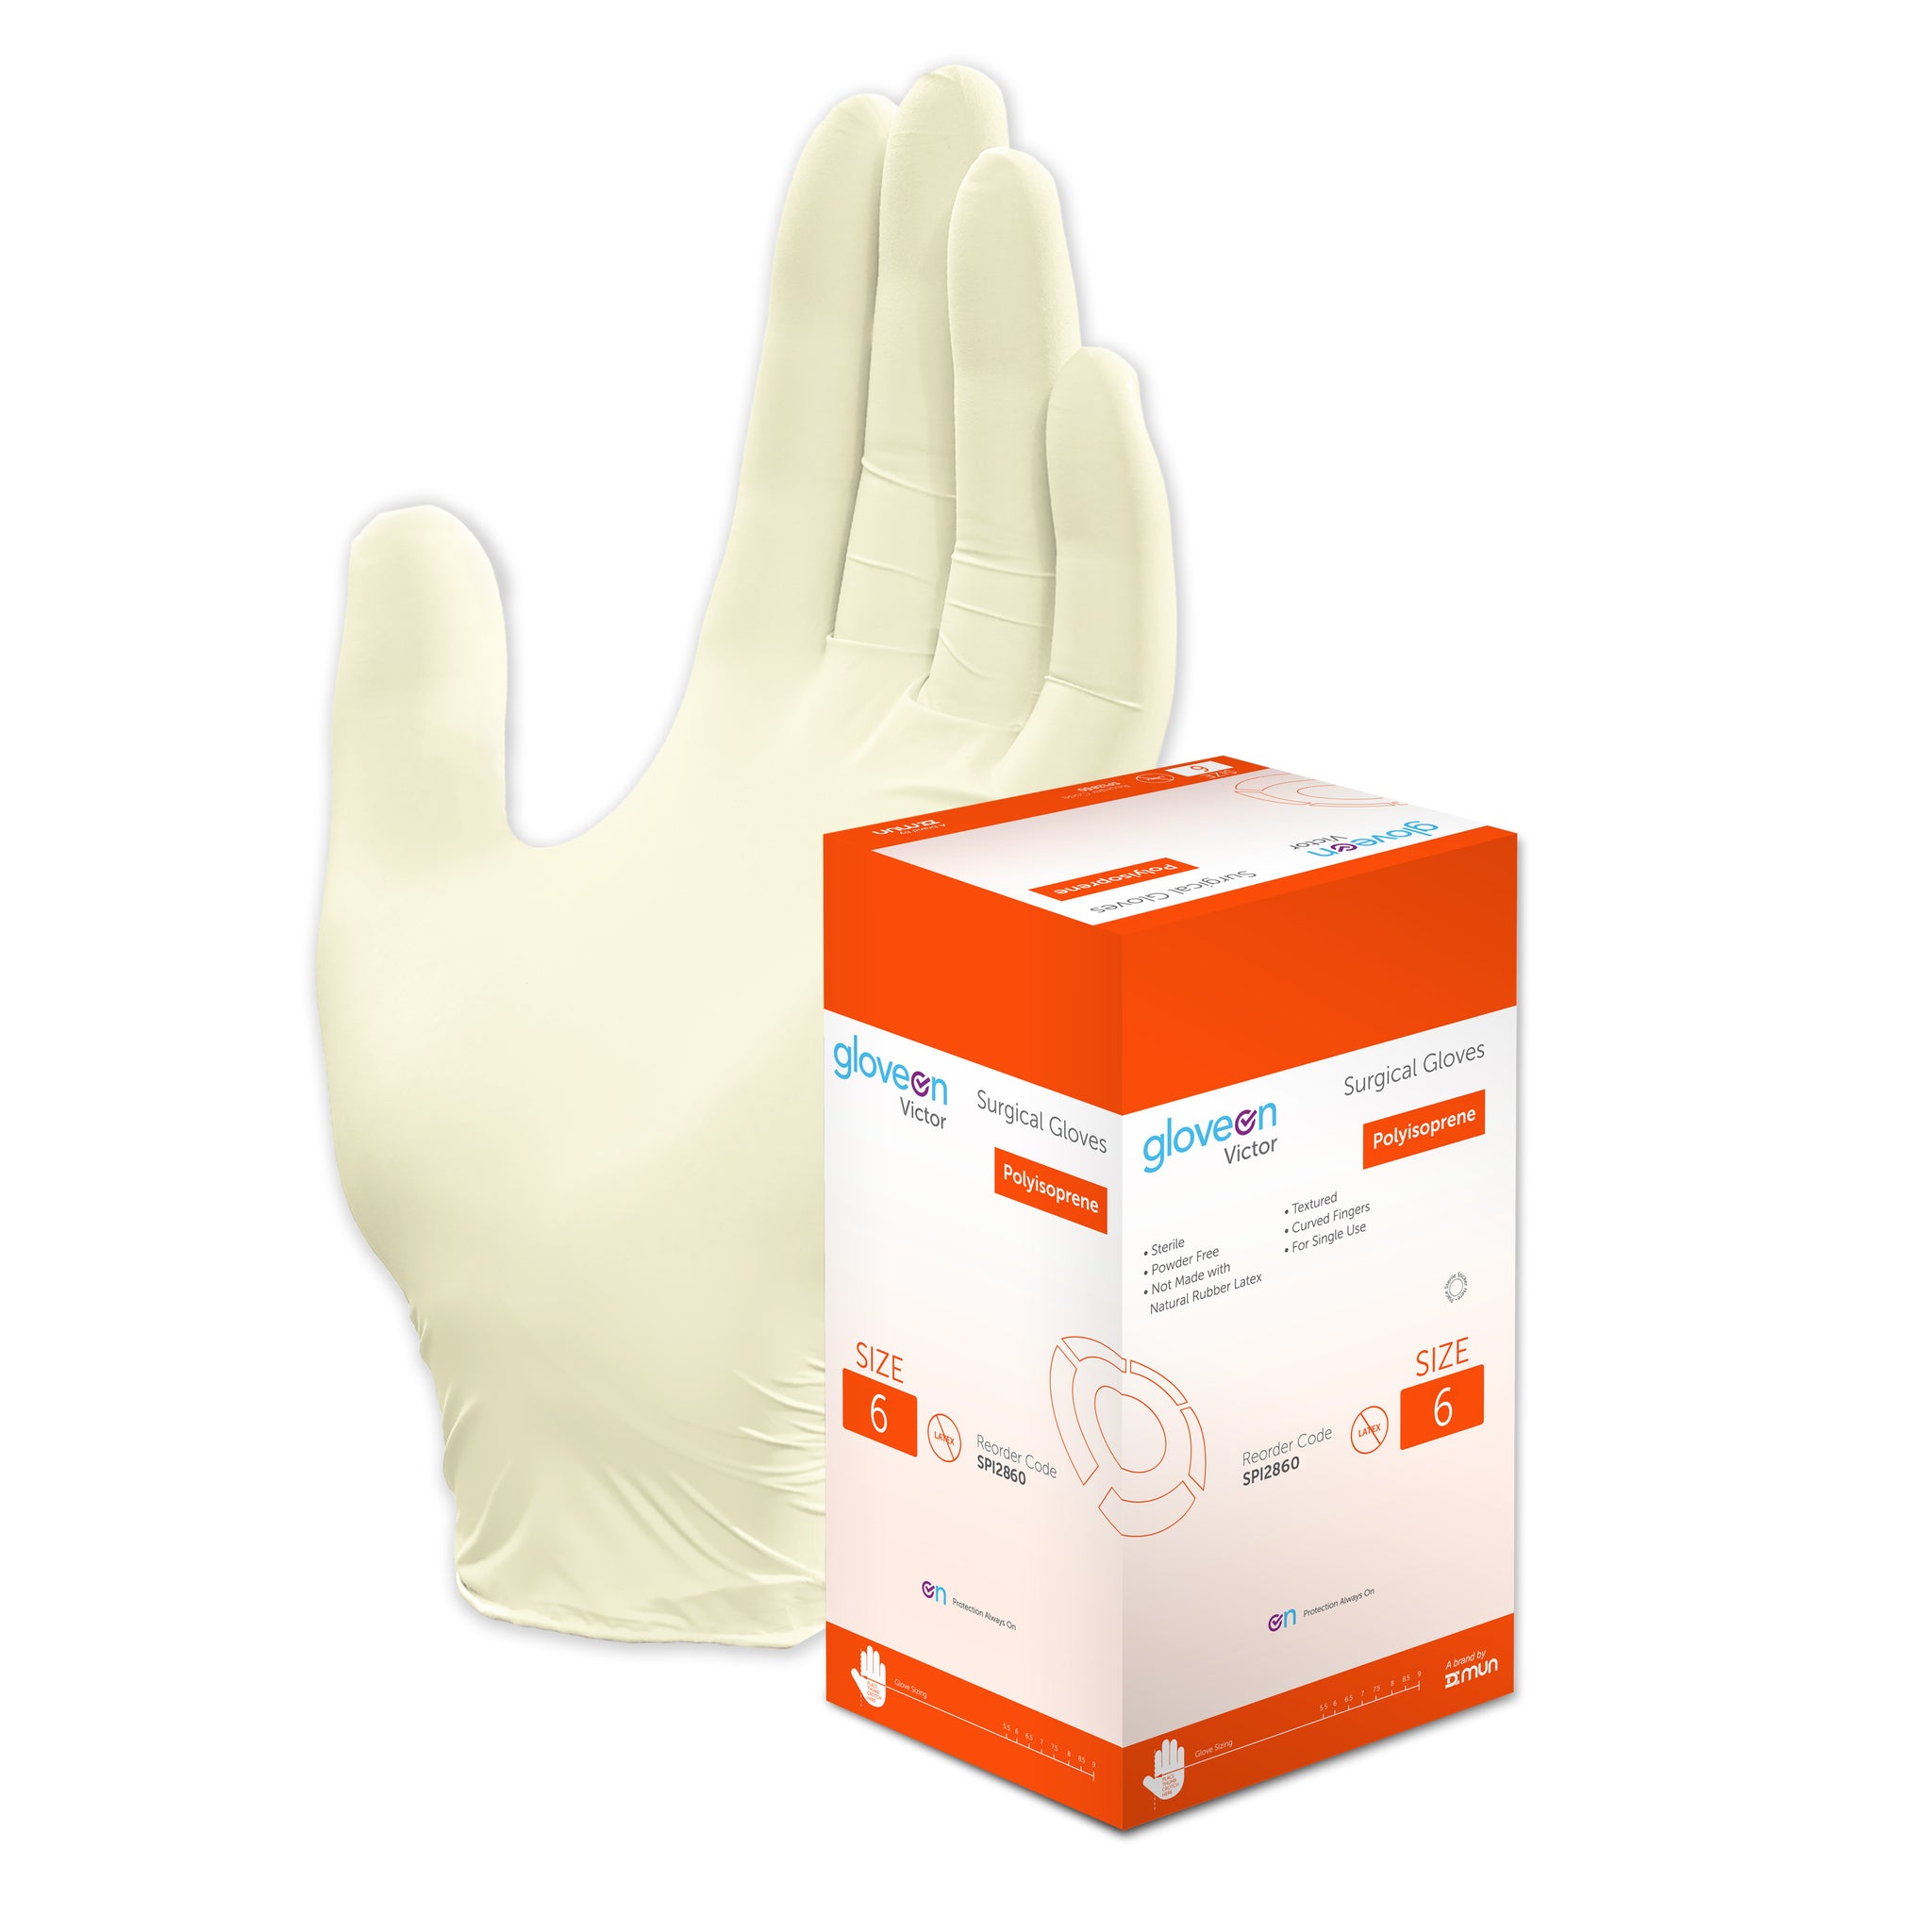 Polyisoprene, Powder Free, Textured, Curved Fingers, Sterile, White - Box of 100, 6